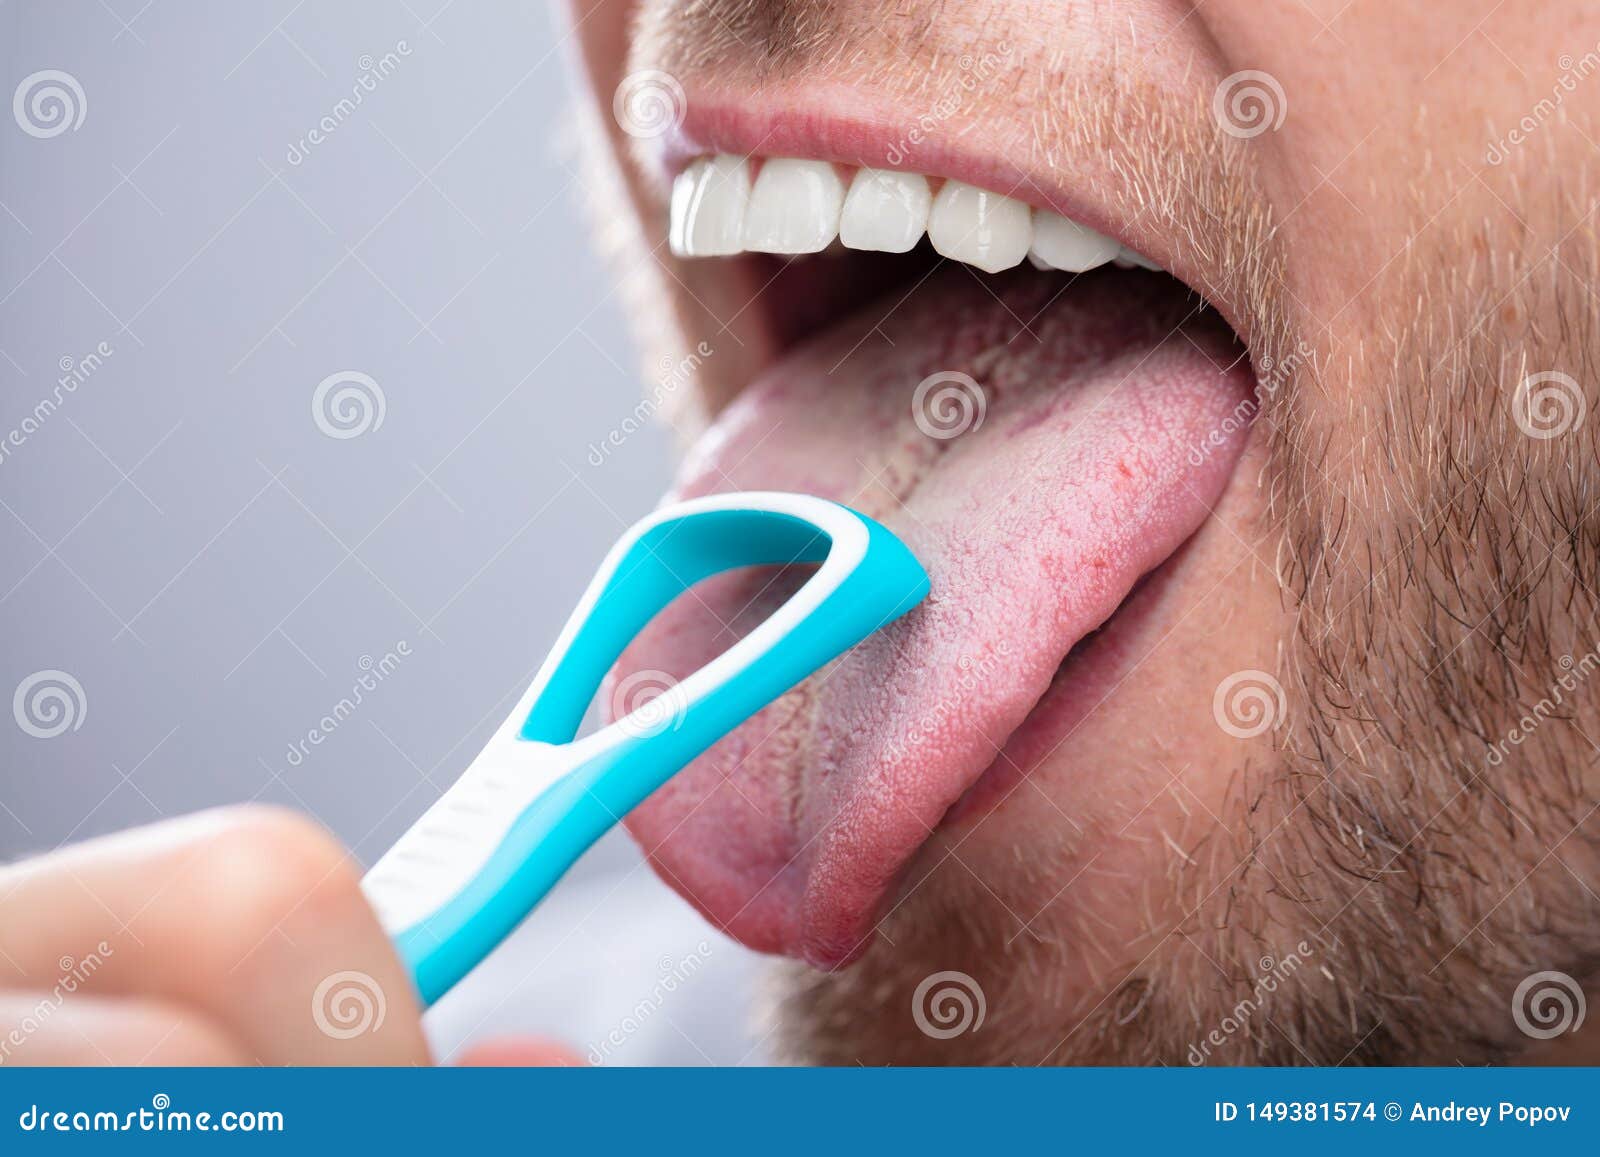 man cleaning his tongue